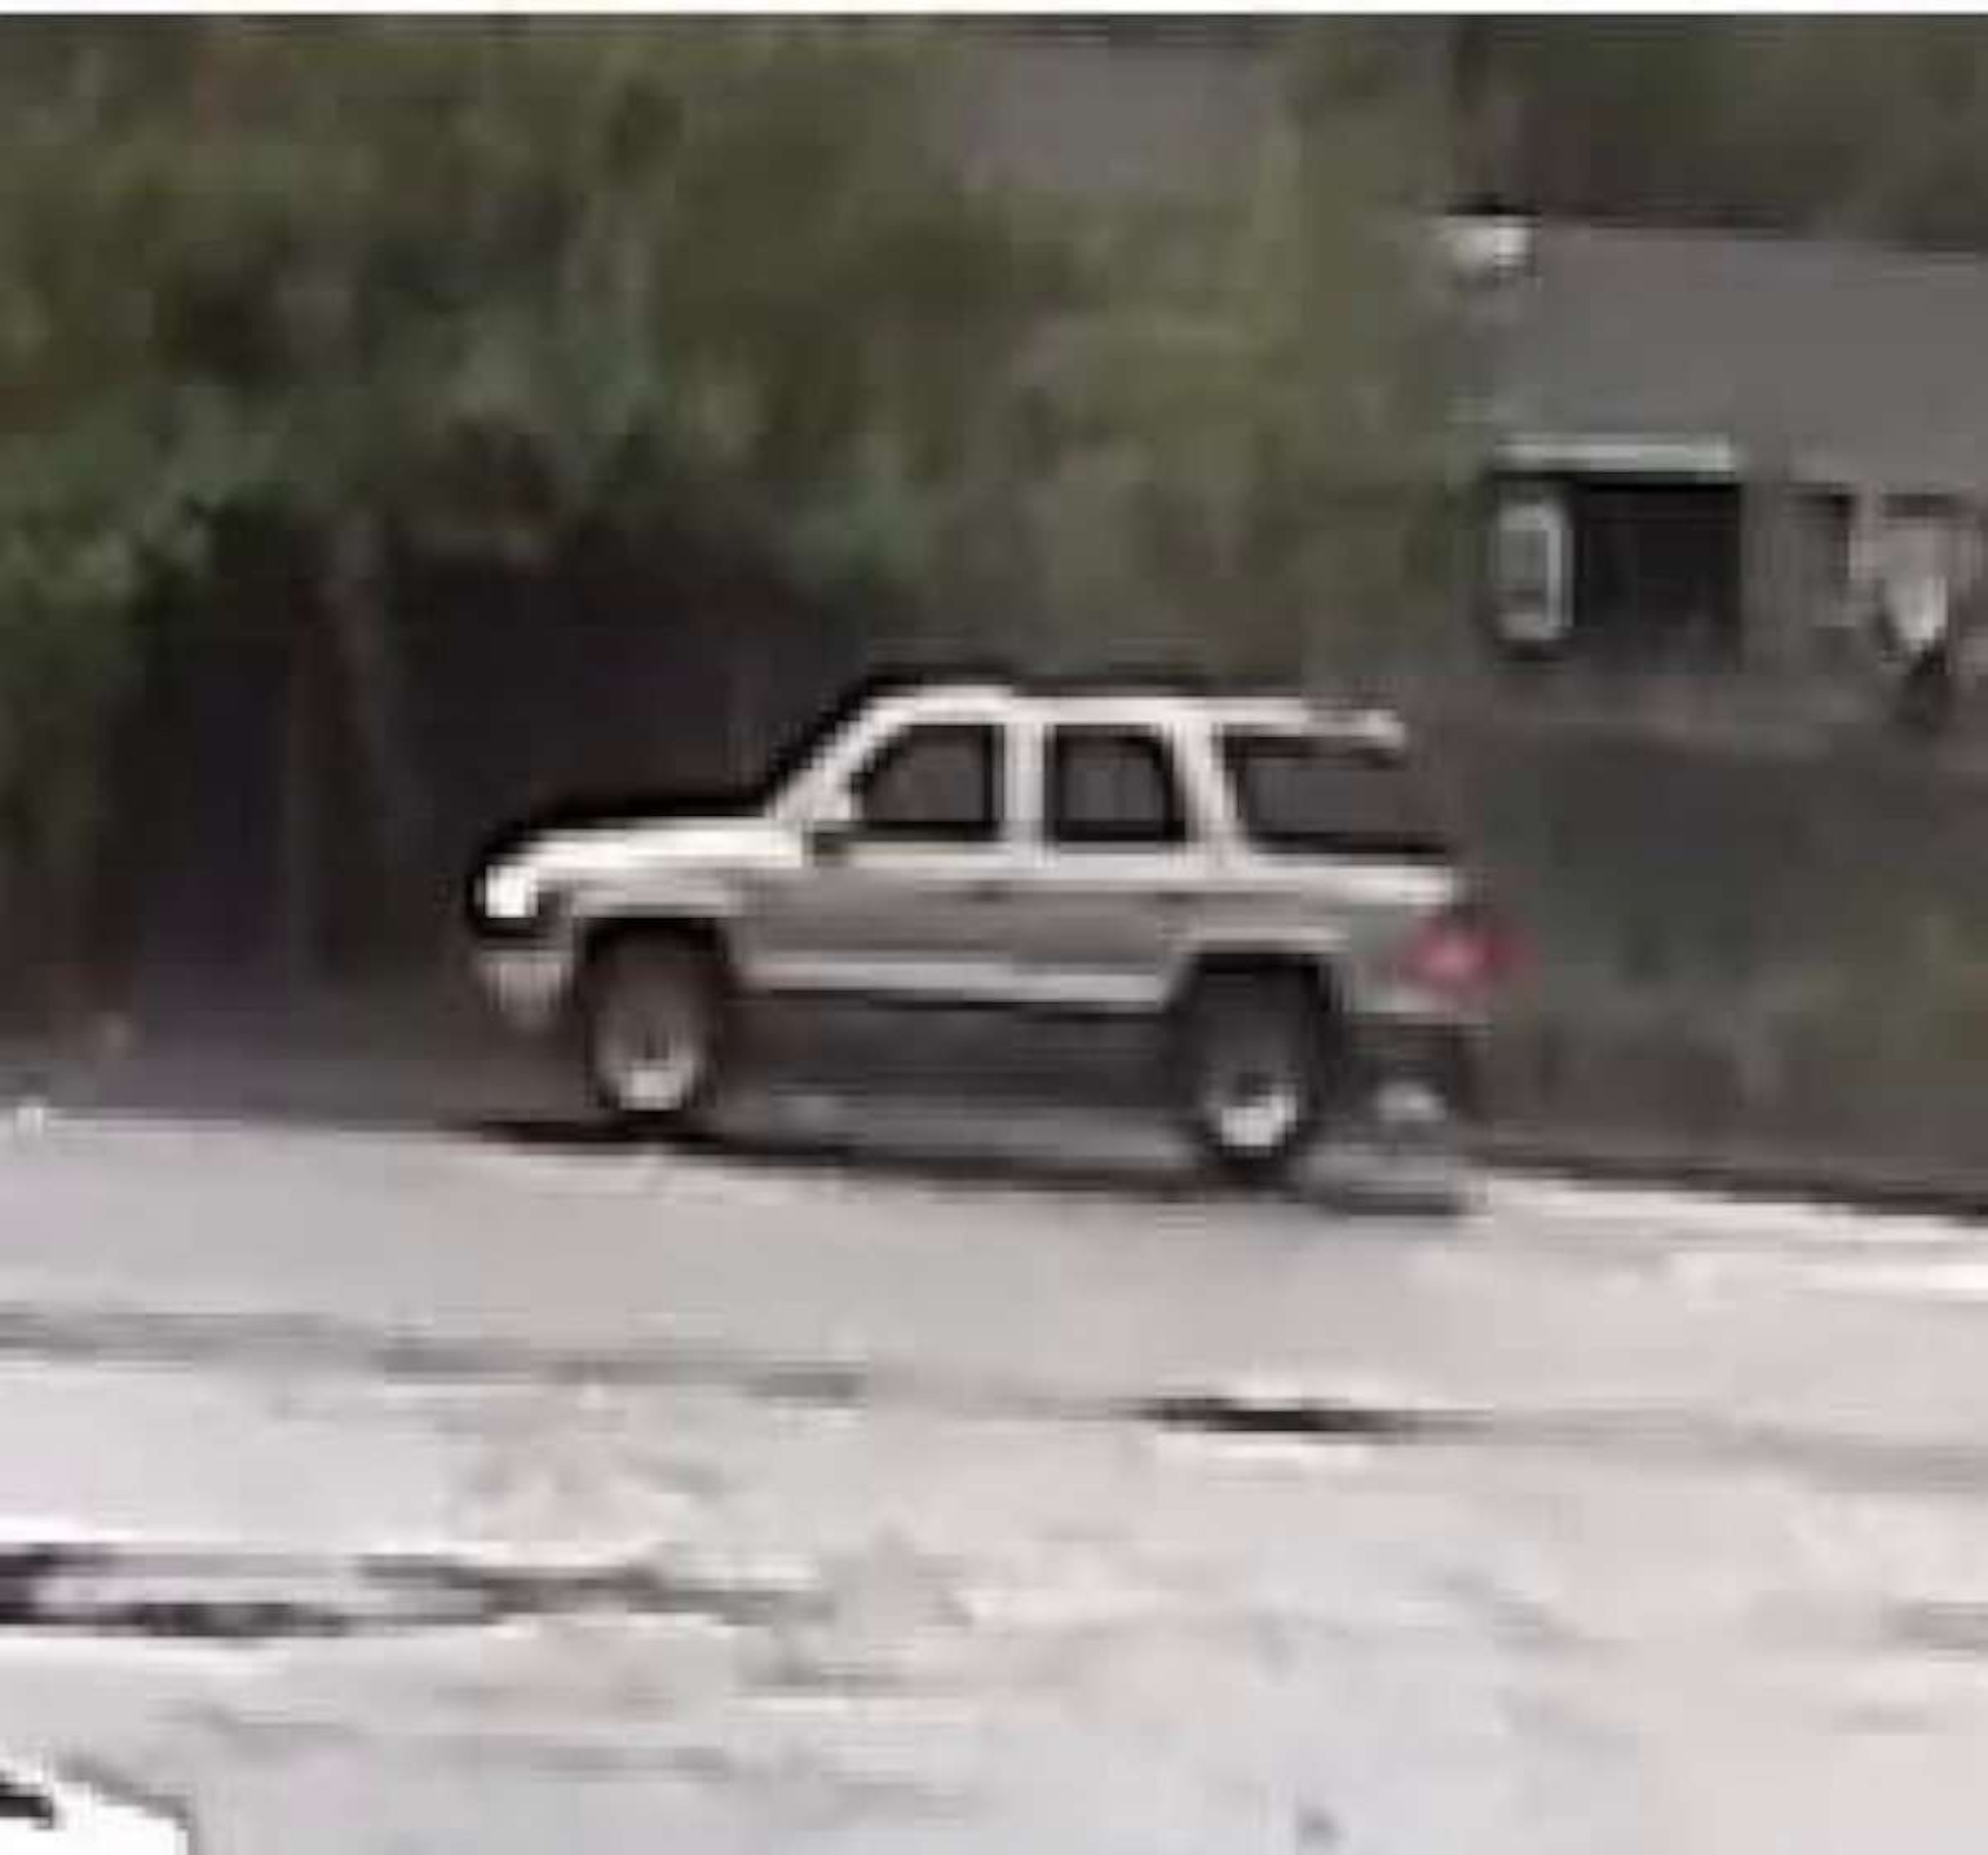 PHOTO: The Pierce County Sheriff's Department released this photo of a vehicle sought in connection with a fatal hit-and-run.